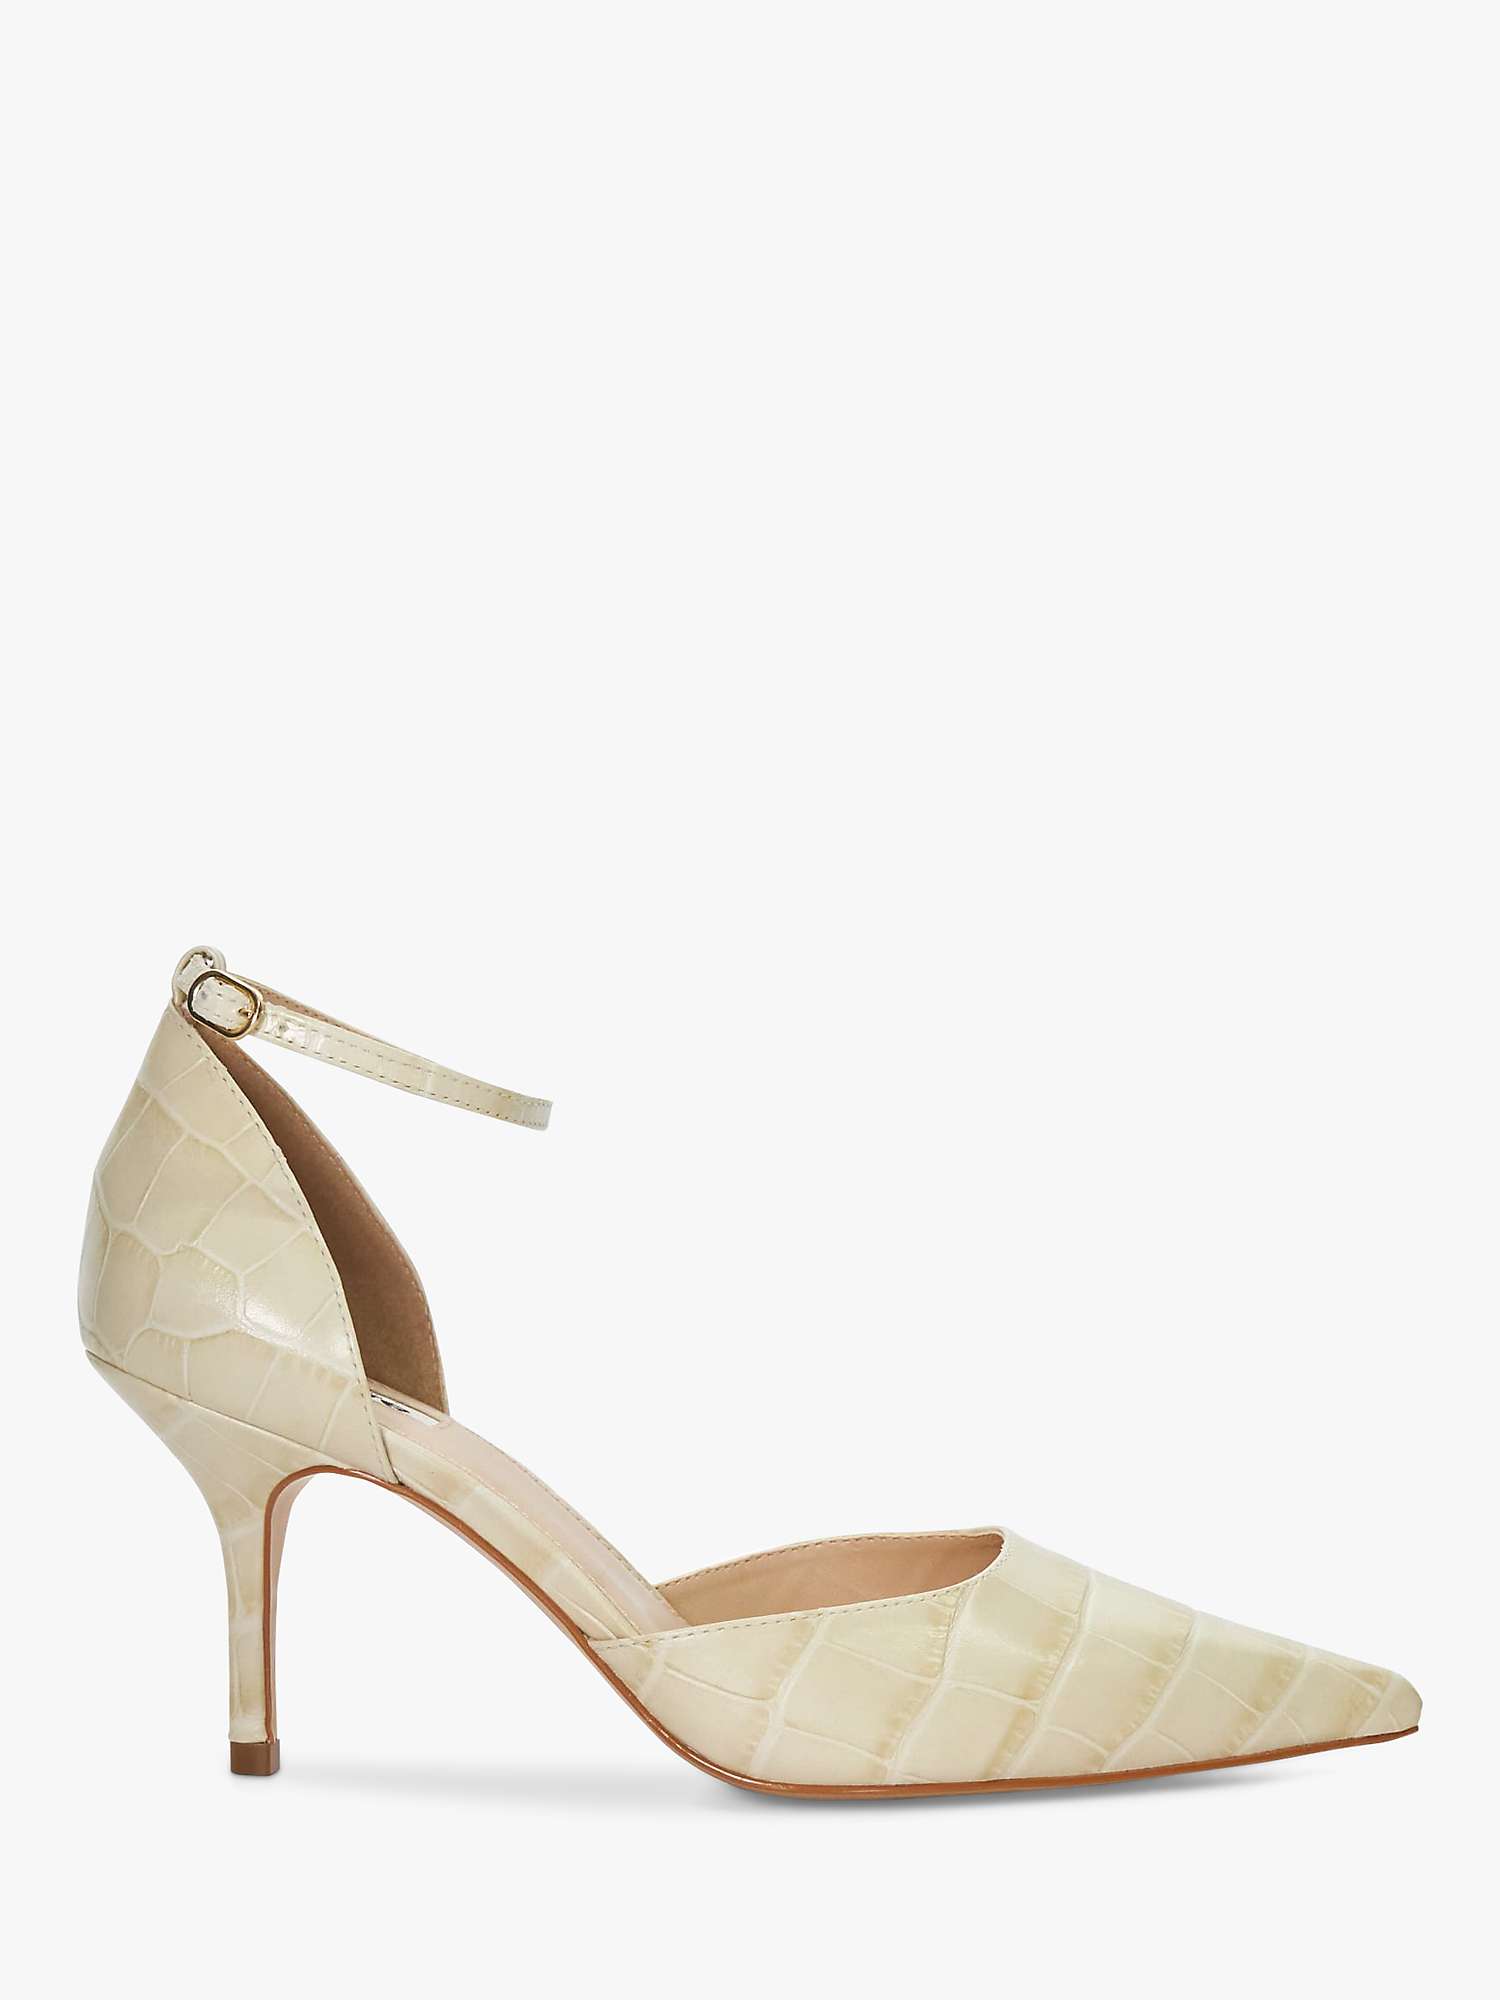 Buy Dune Characters Leather Court Shoes, Cream Online at johnlewis.com